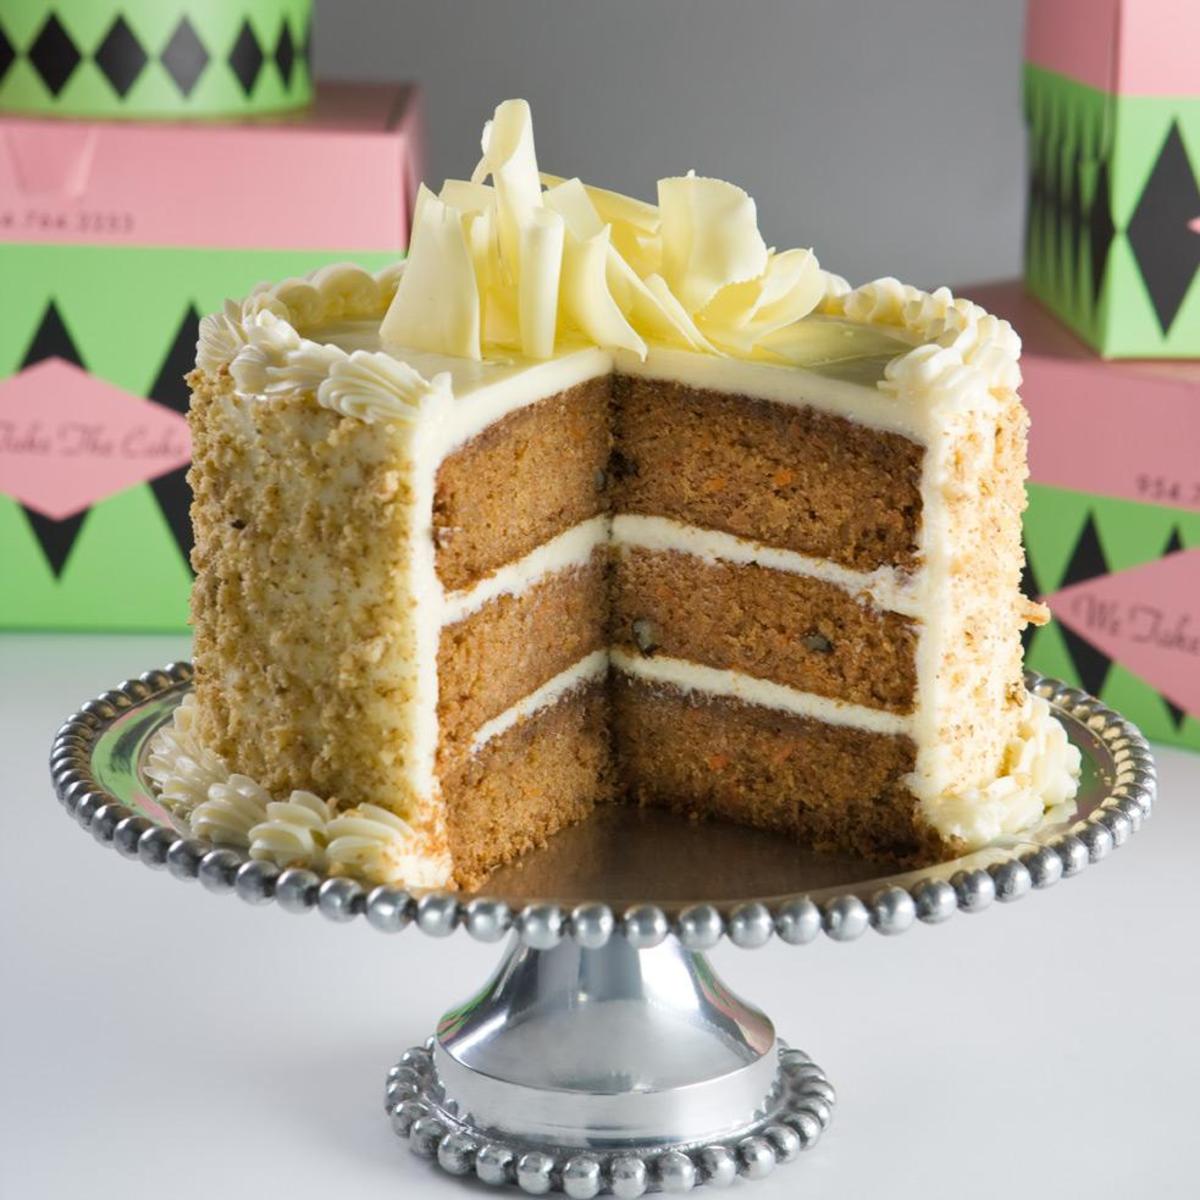 carrot-cake-with-caramel-glaze-and-cream-cheese-frosting